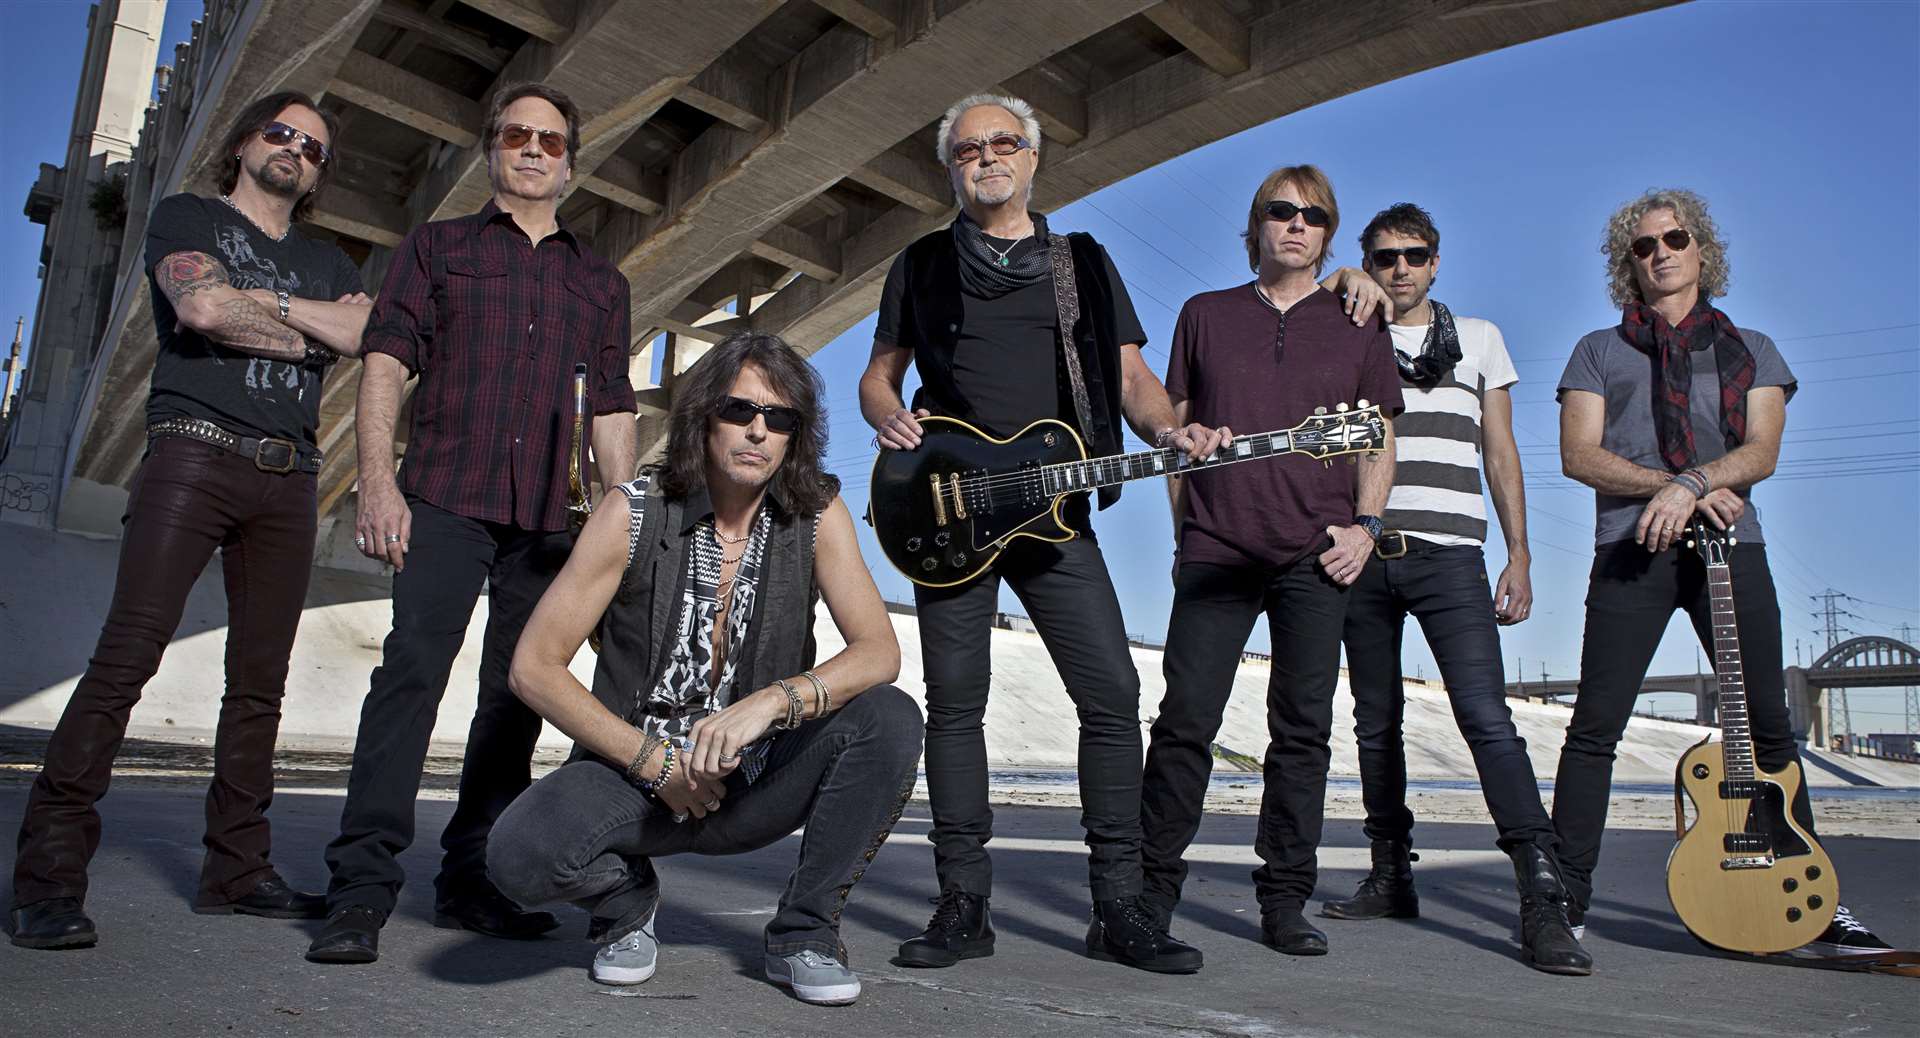 Foreigner are the first headliner to be announced for Ramblin' Man Fair 2019